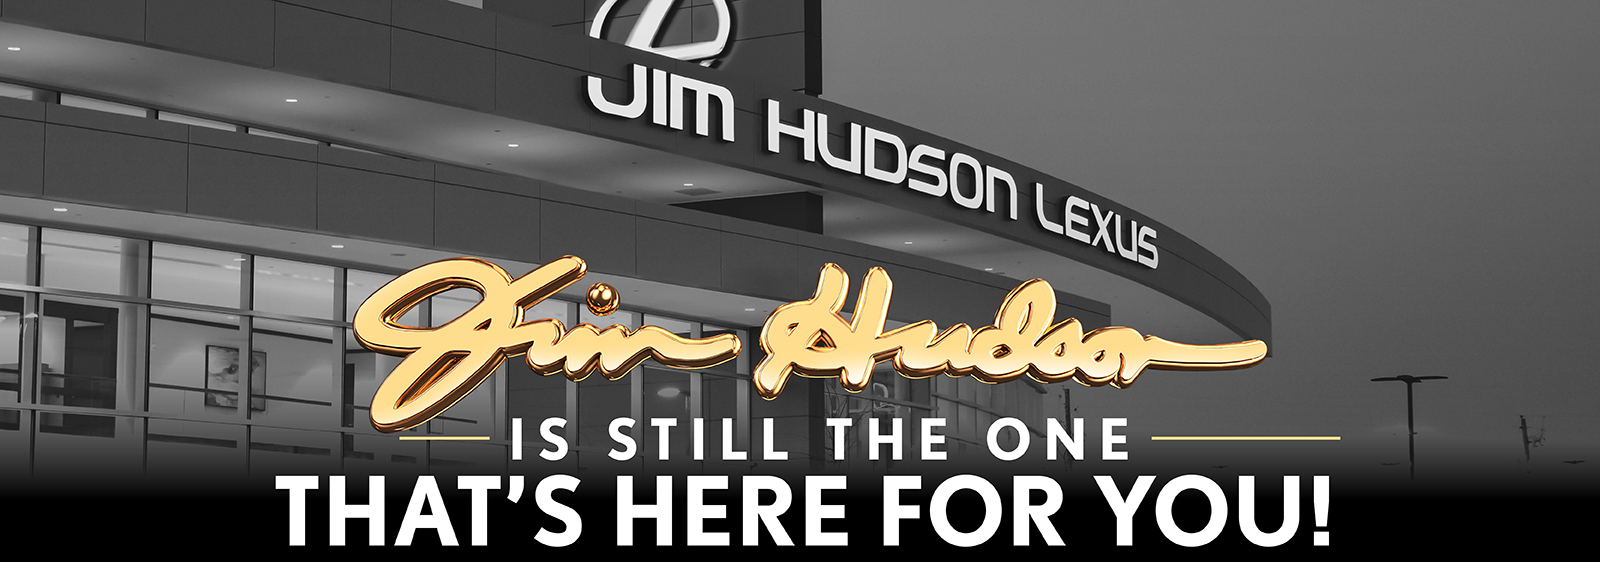 Jim Hudson is still the one that's here for you!